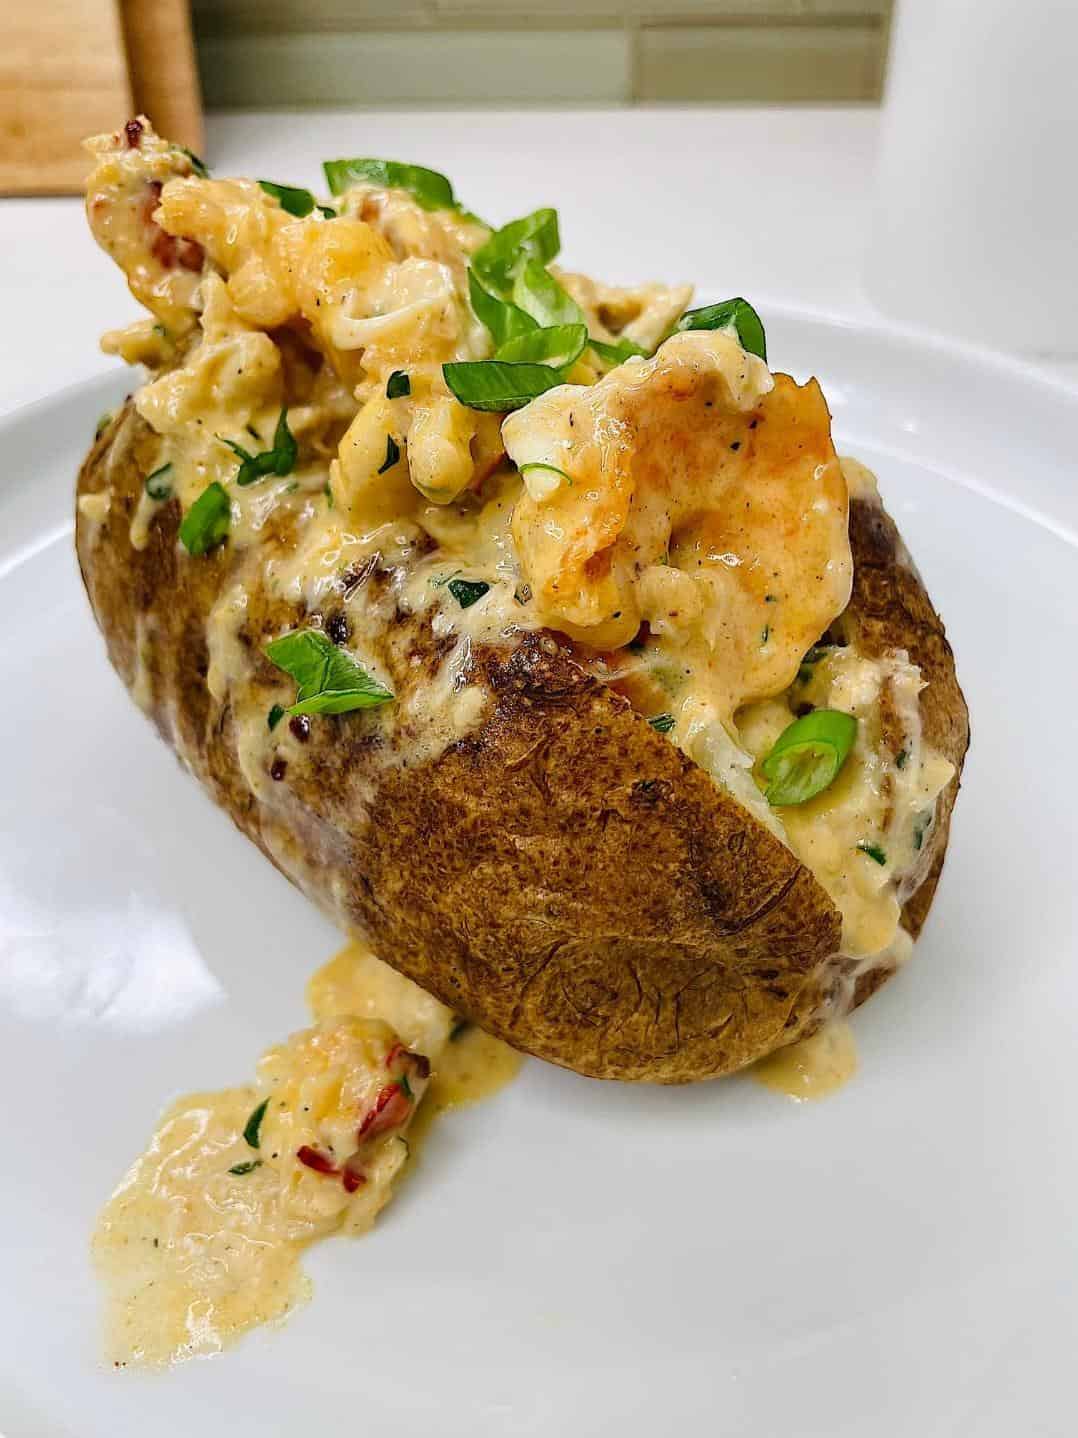  You'll never think of a baked potato the same way again once you try our seafood stuffed version!